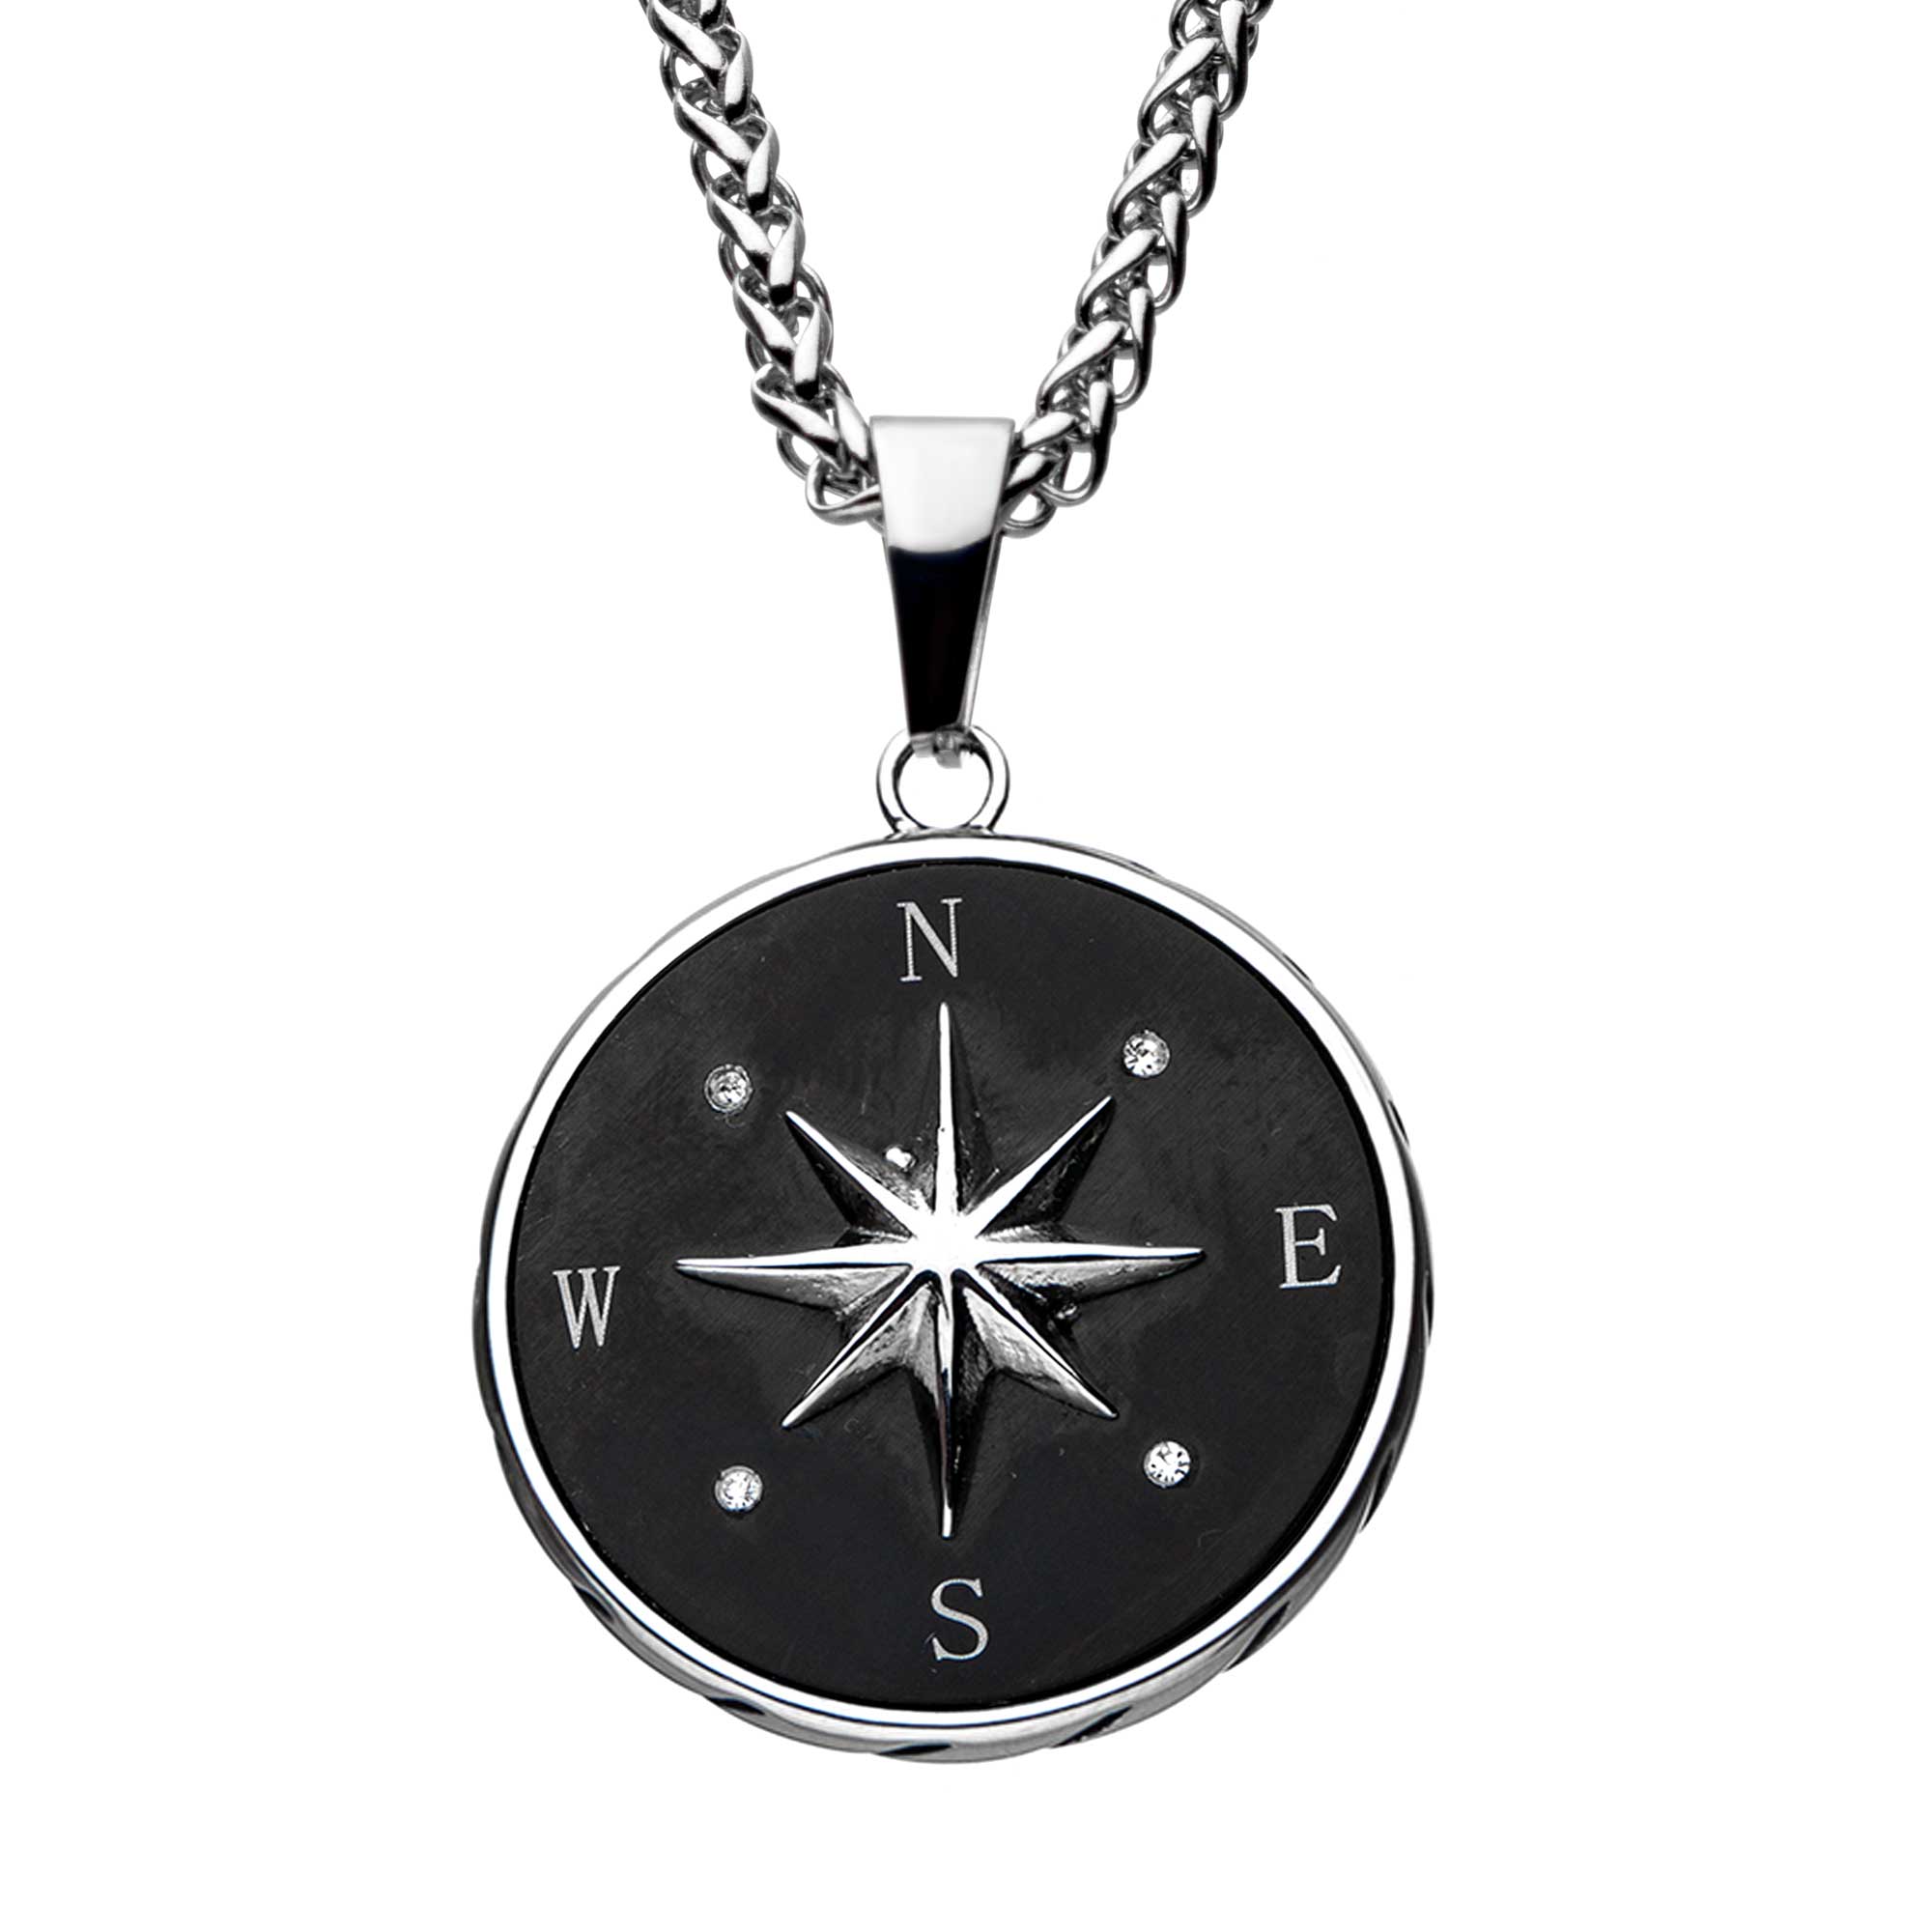 Stainless Steel and Black Plated Compass Pendant with Chain Ken Walker Jewelers Gig Harbor, WA